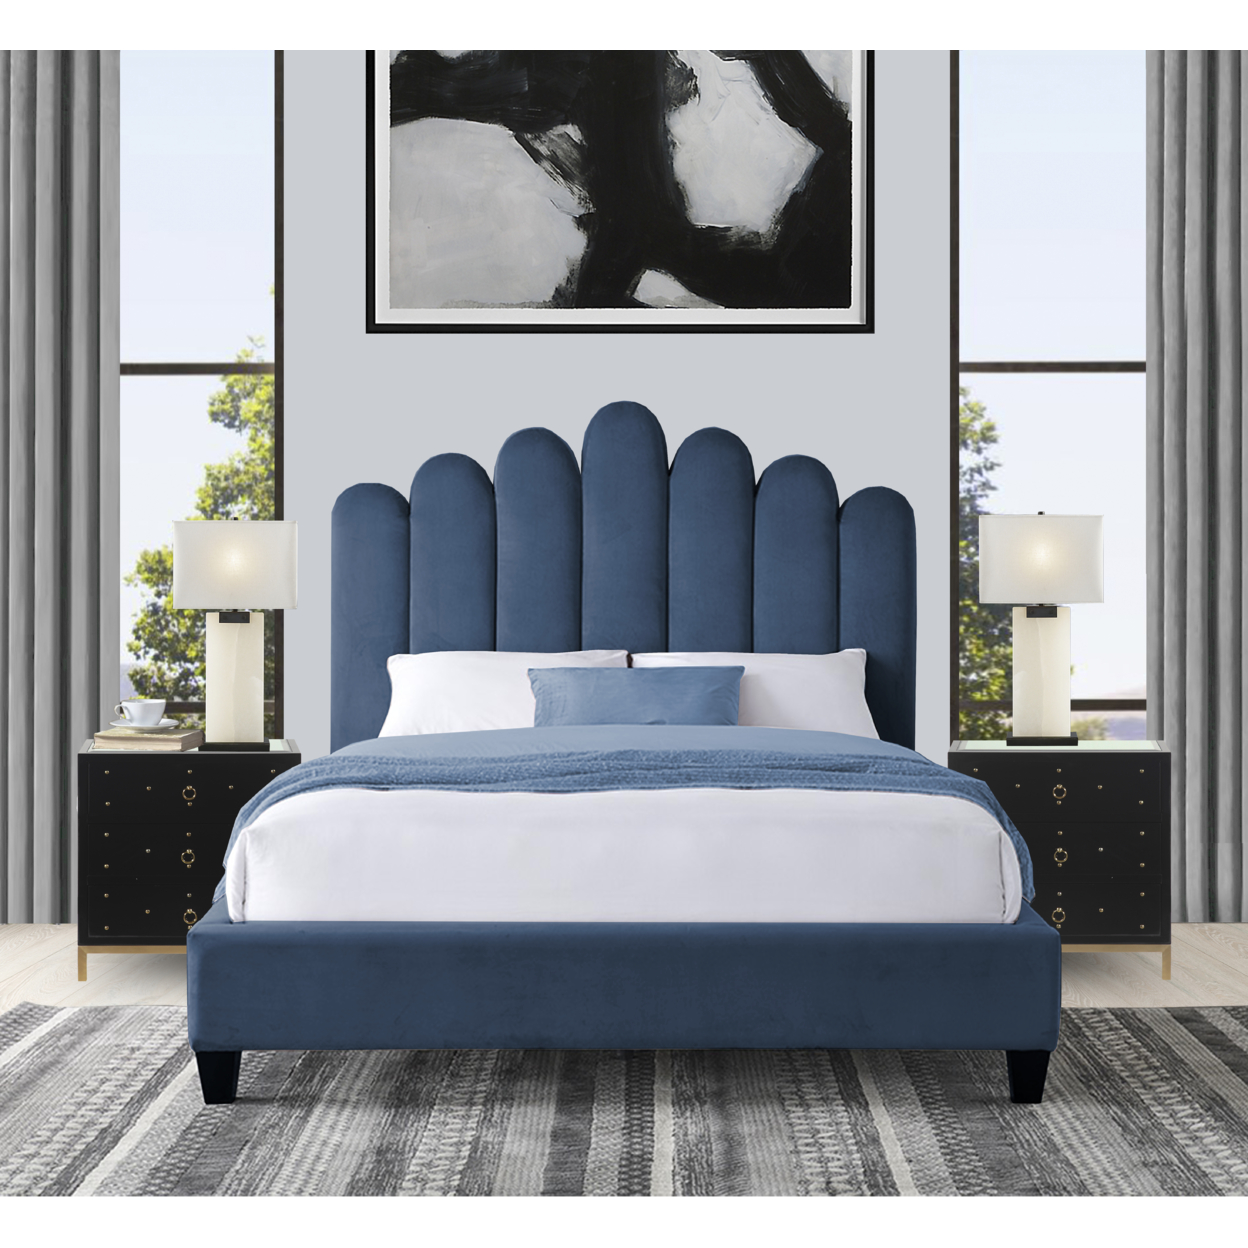 Iconic Home Brynn Platform Bed Frame With Headboard Velvet Upholstered Vertical Channel Quilted - Slate Blue, Queen